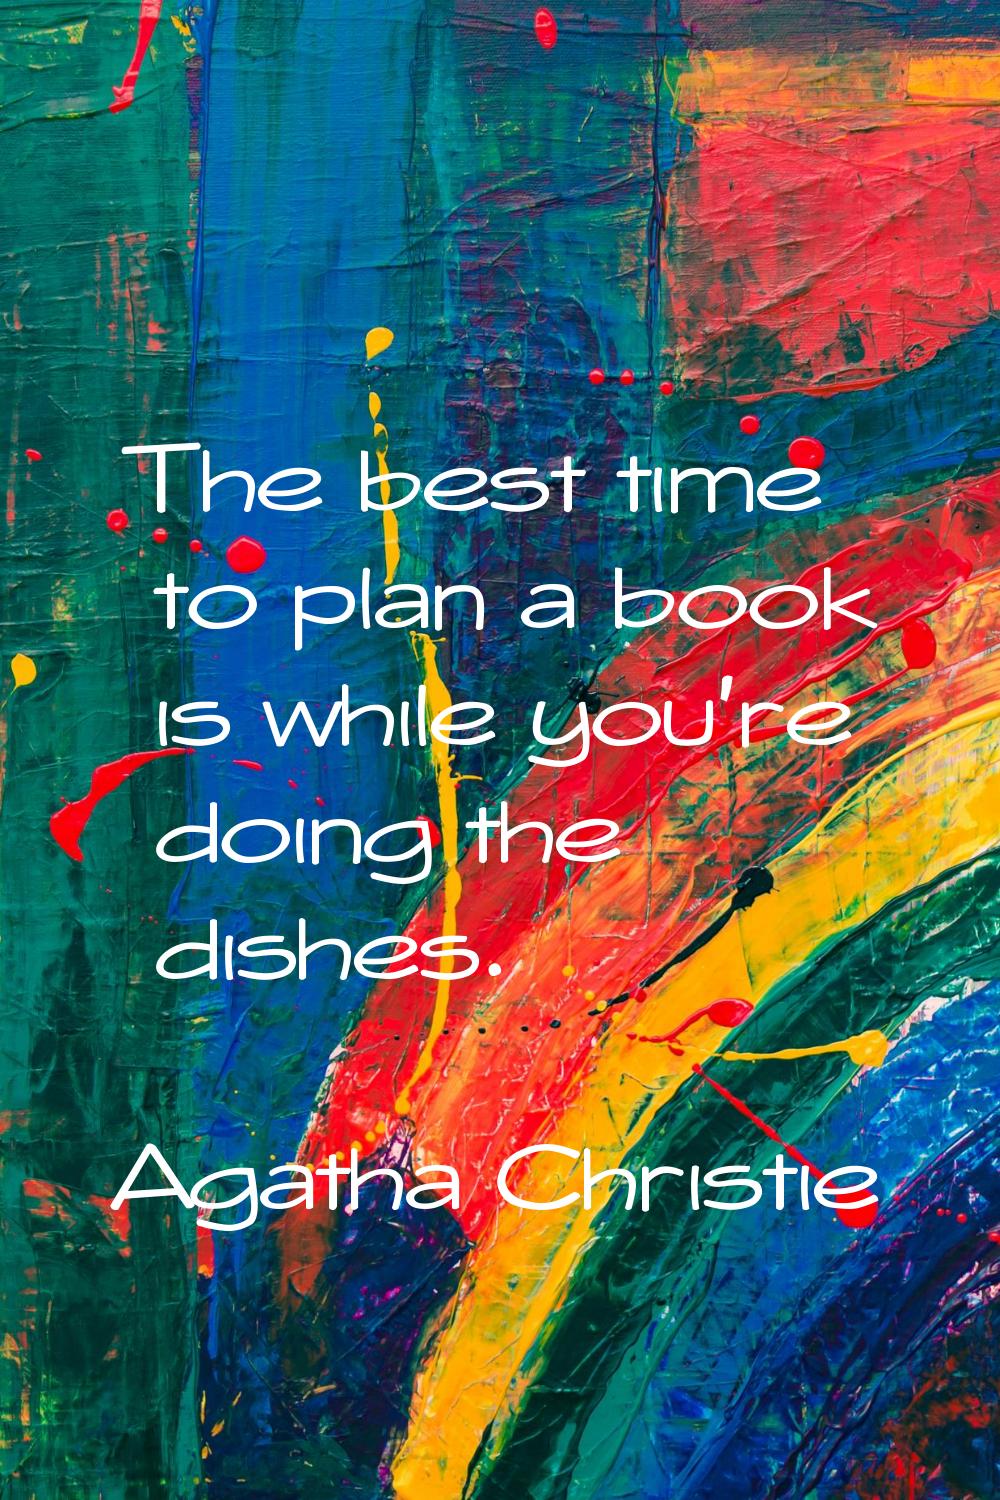 The best time to plan a book is while you're doing the dishes.